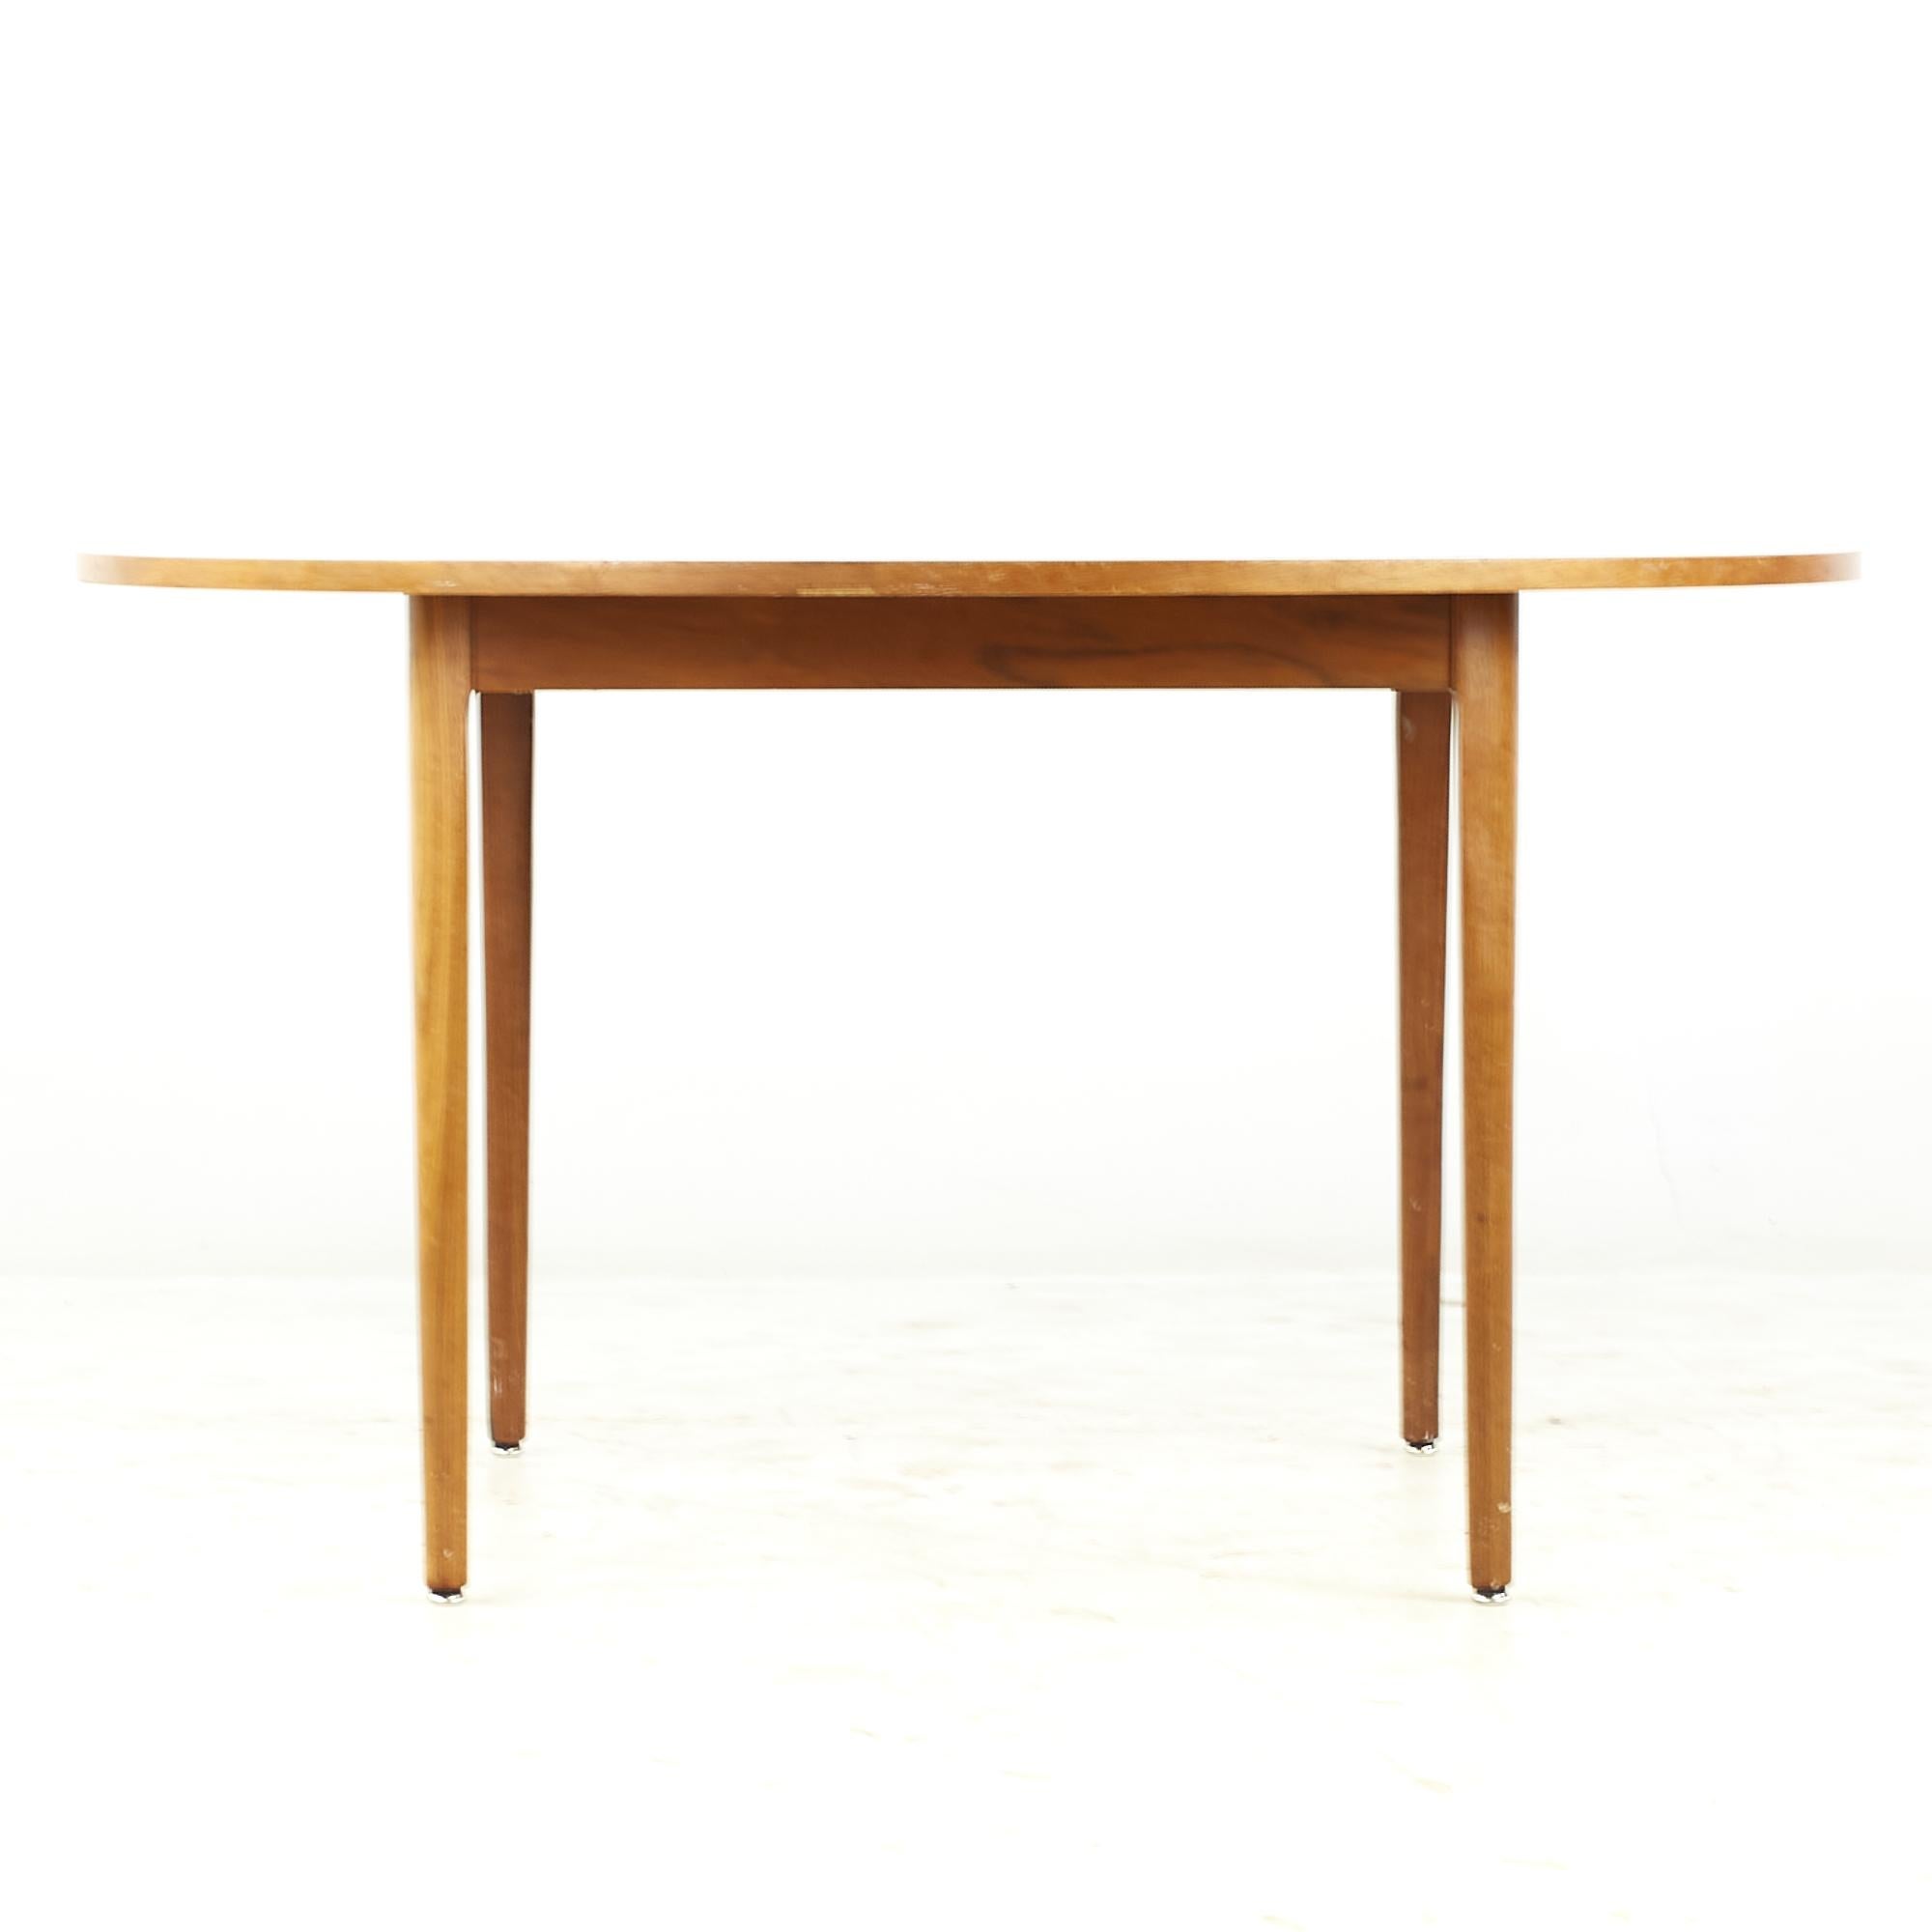 Kipp Stewart for Drexel Declaration Midcentury Walnut Dining Table In Good Condition For Sale In Countryside, IL